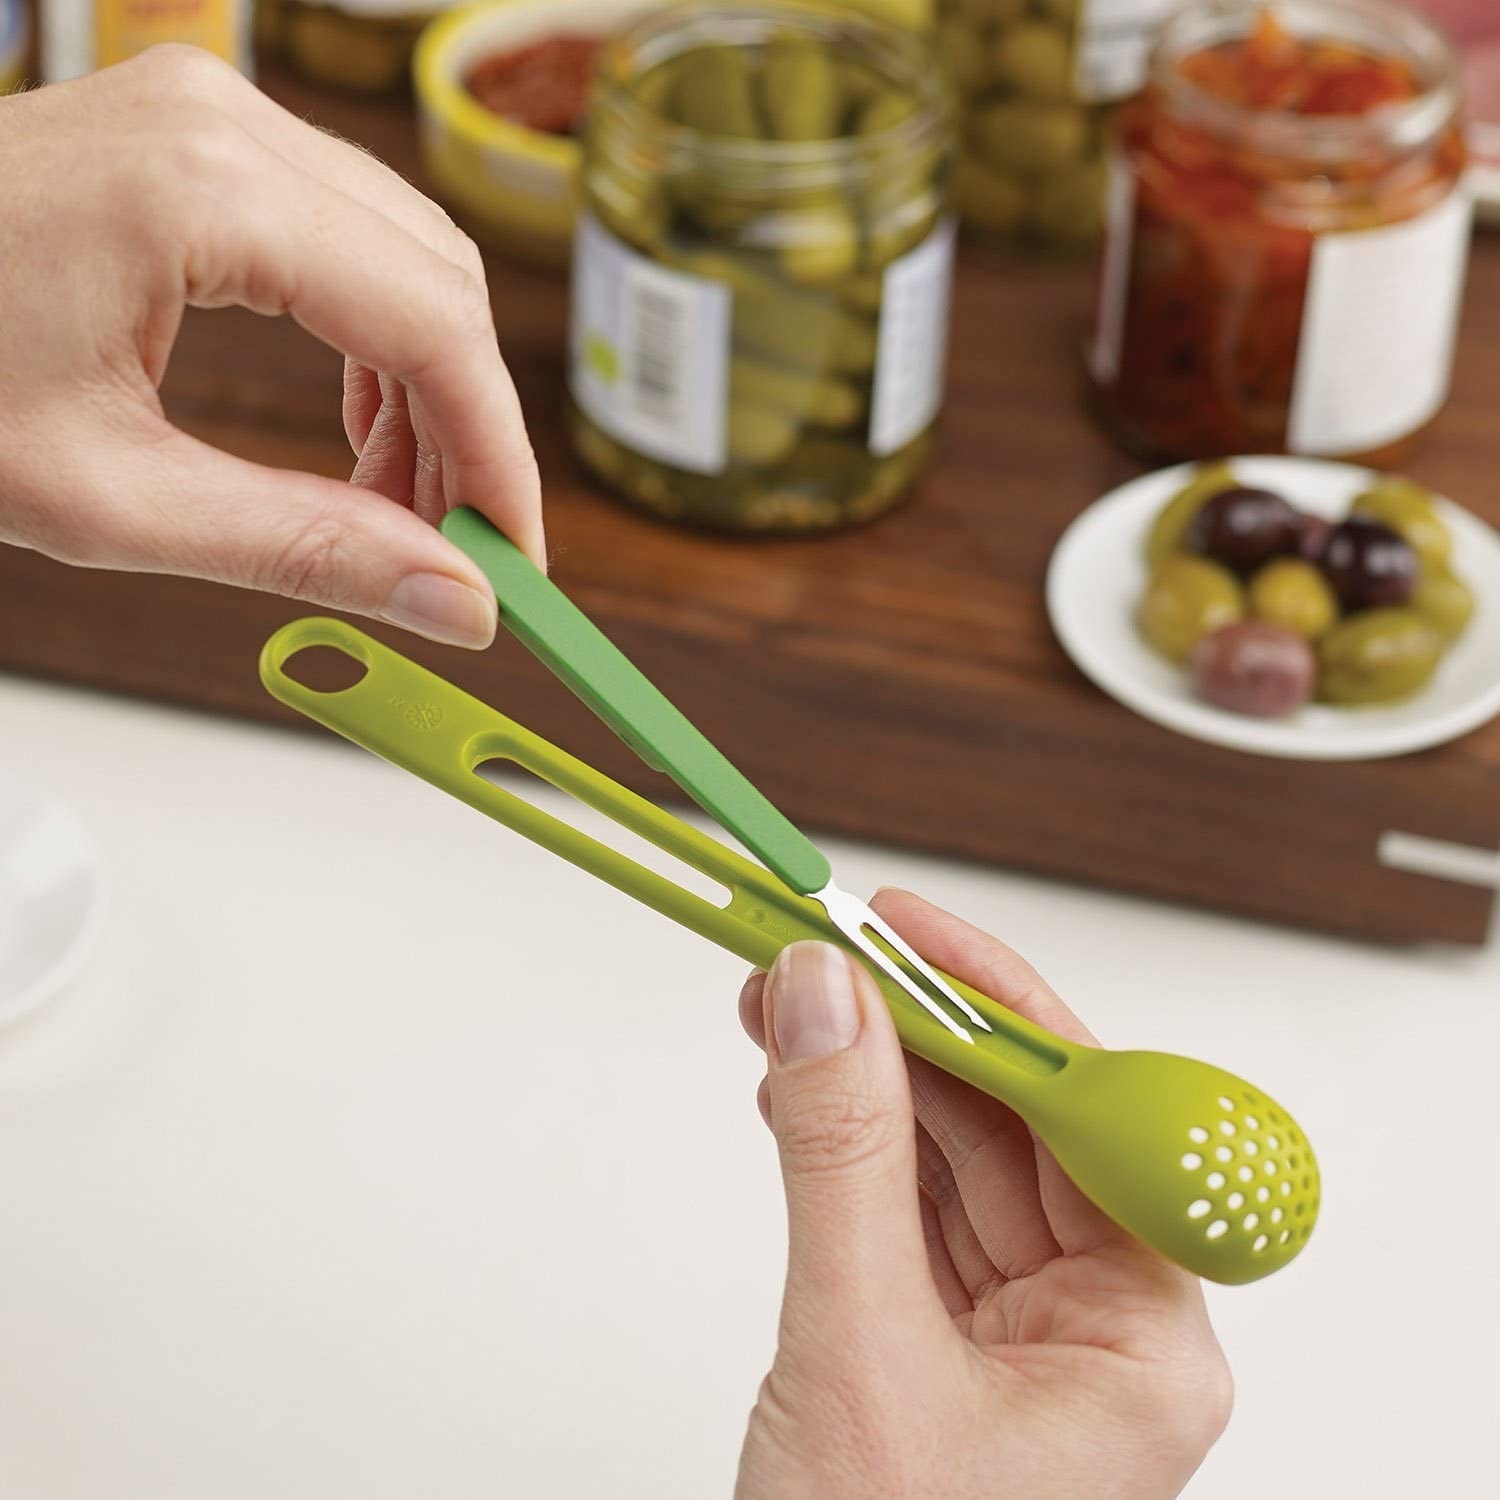 A person putting the skewer into the spoon